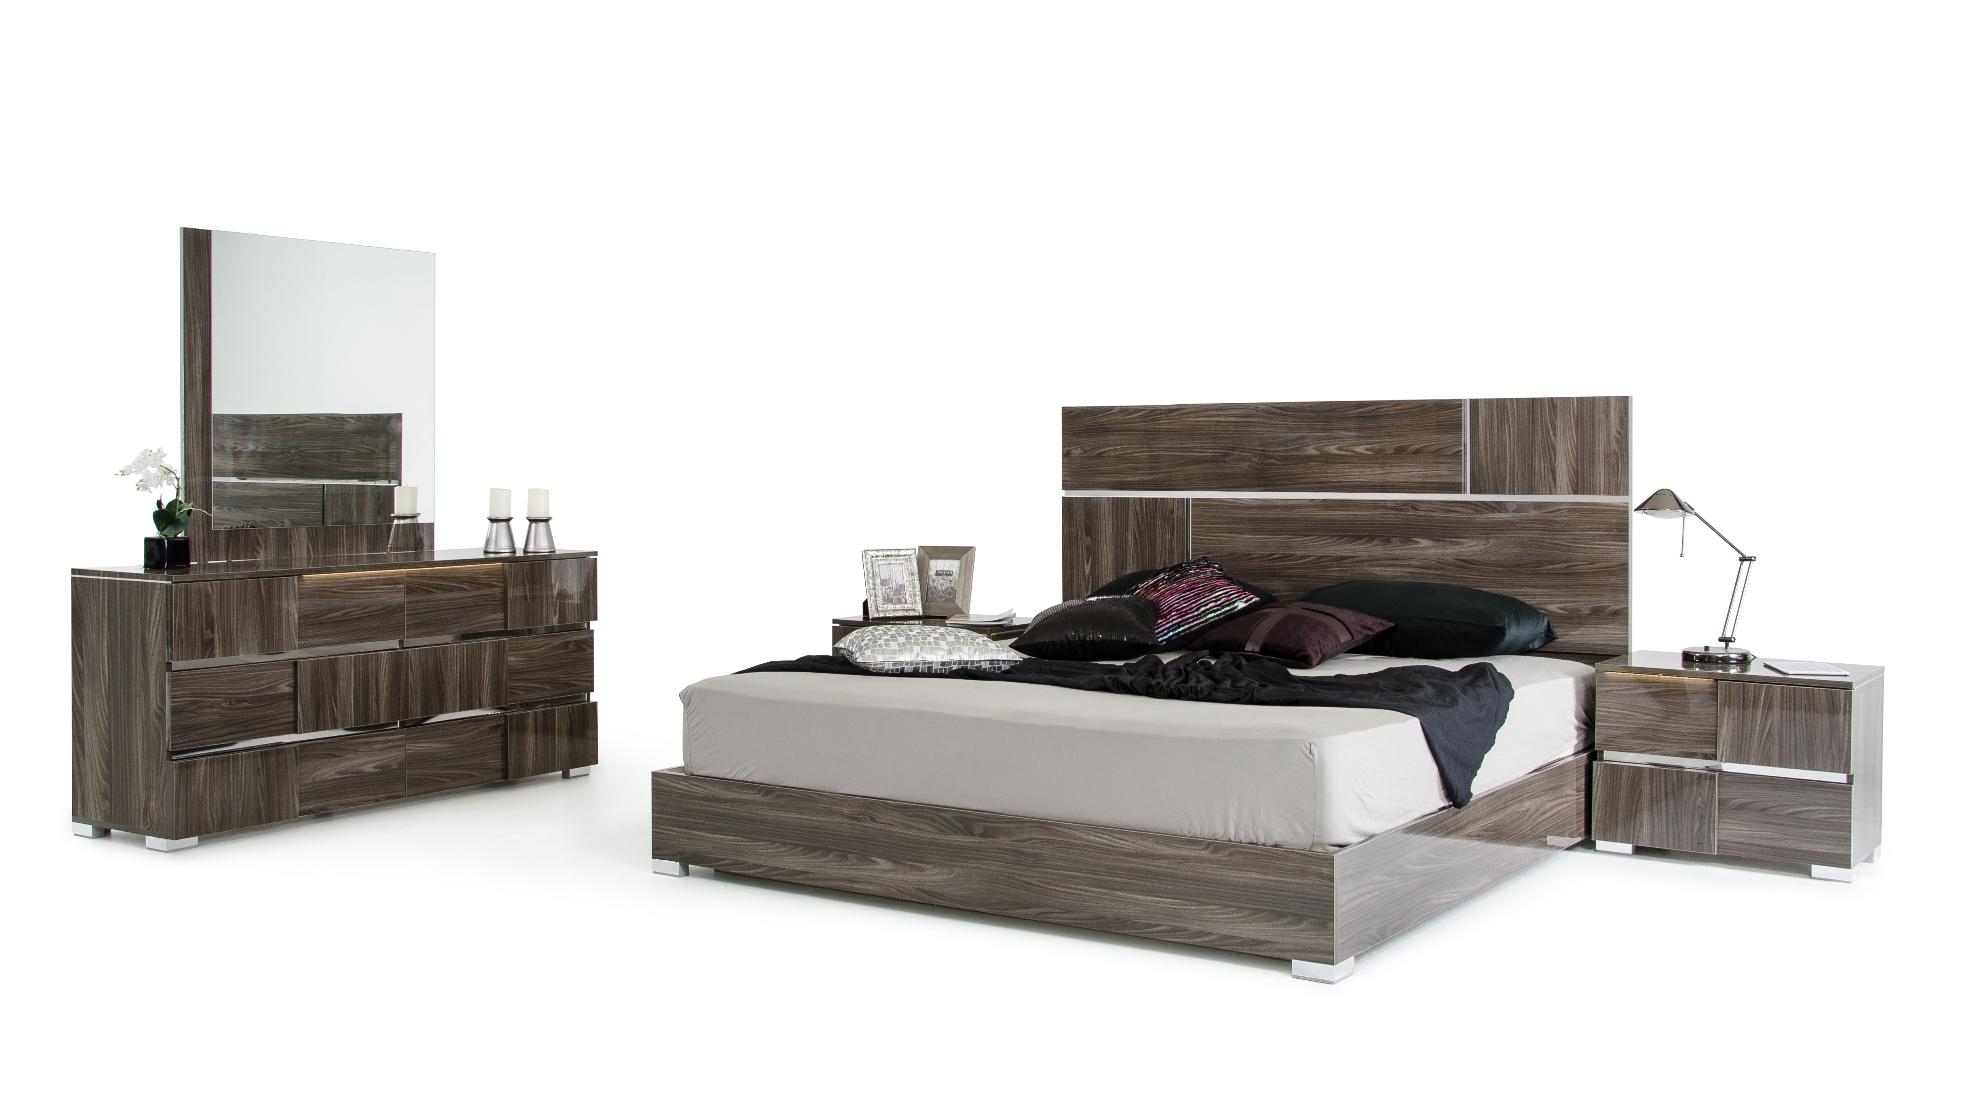 

    
VGACPICASSO-BED-GRY-EK-Set-3 VIG Modrest Picasso Elm Grey Lacquer Finish King Bedroom Set 3Pcs Made In Italy
